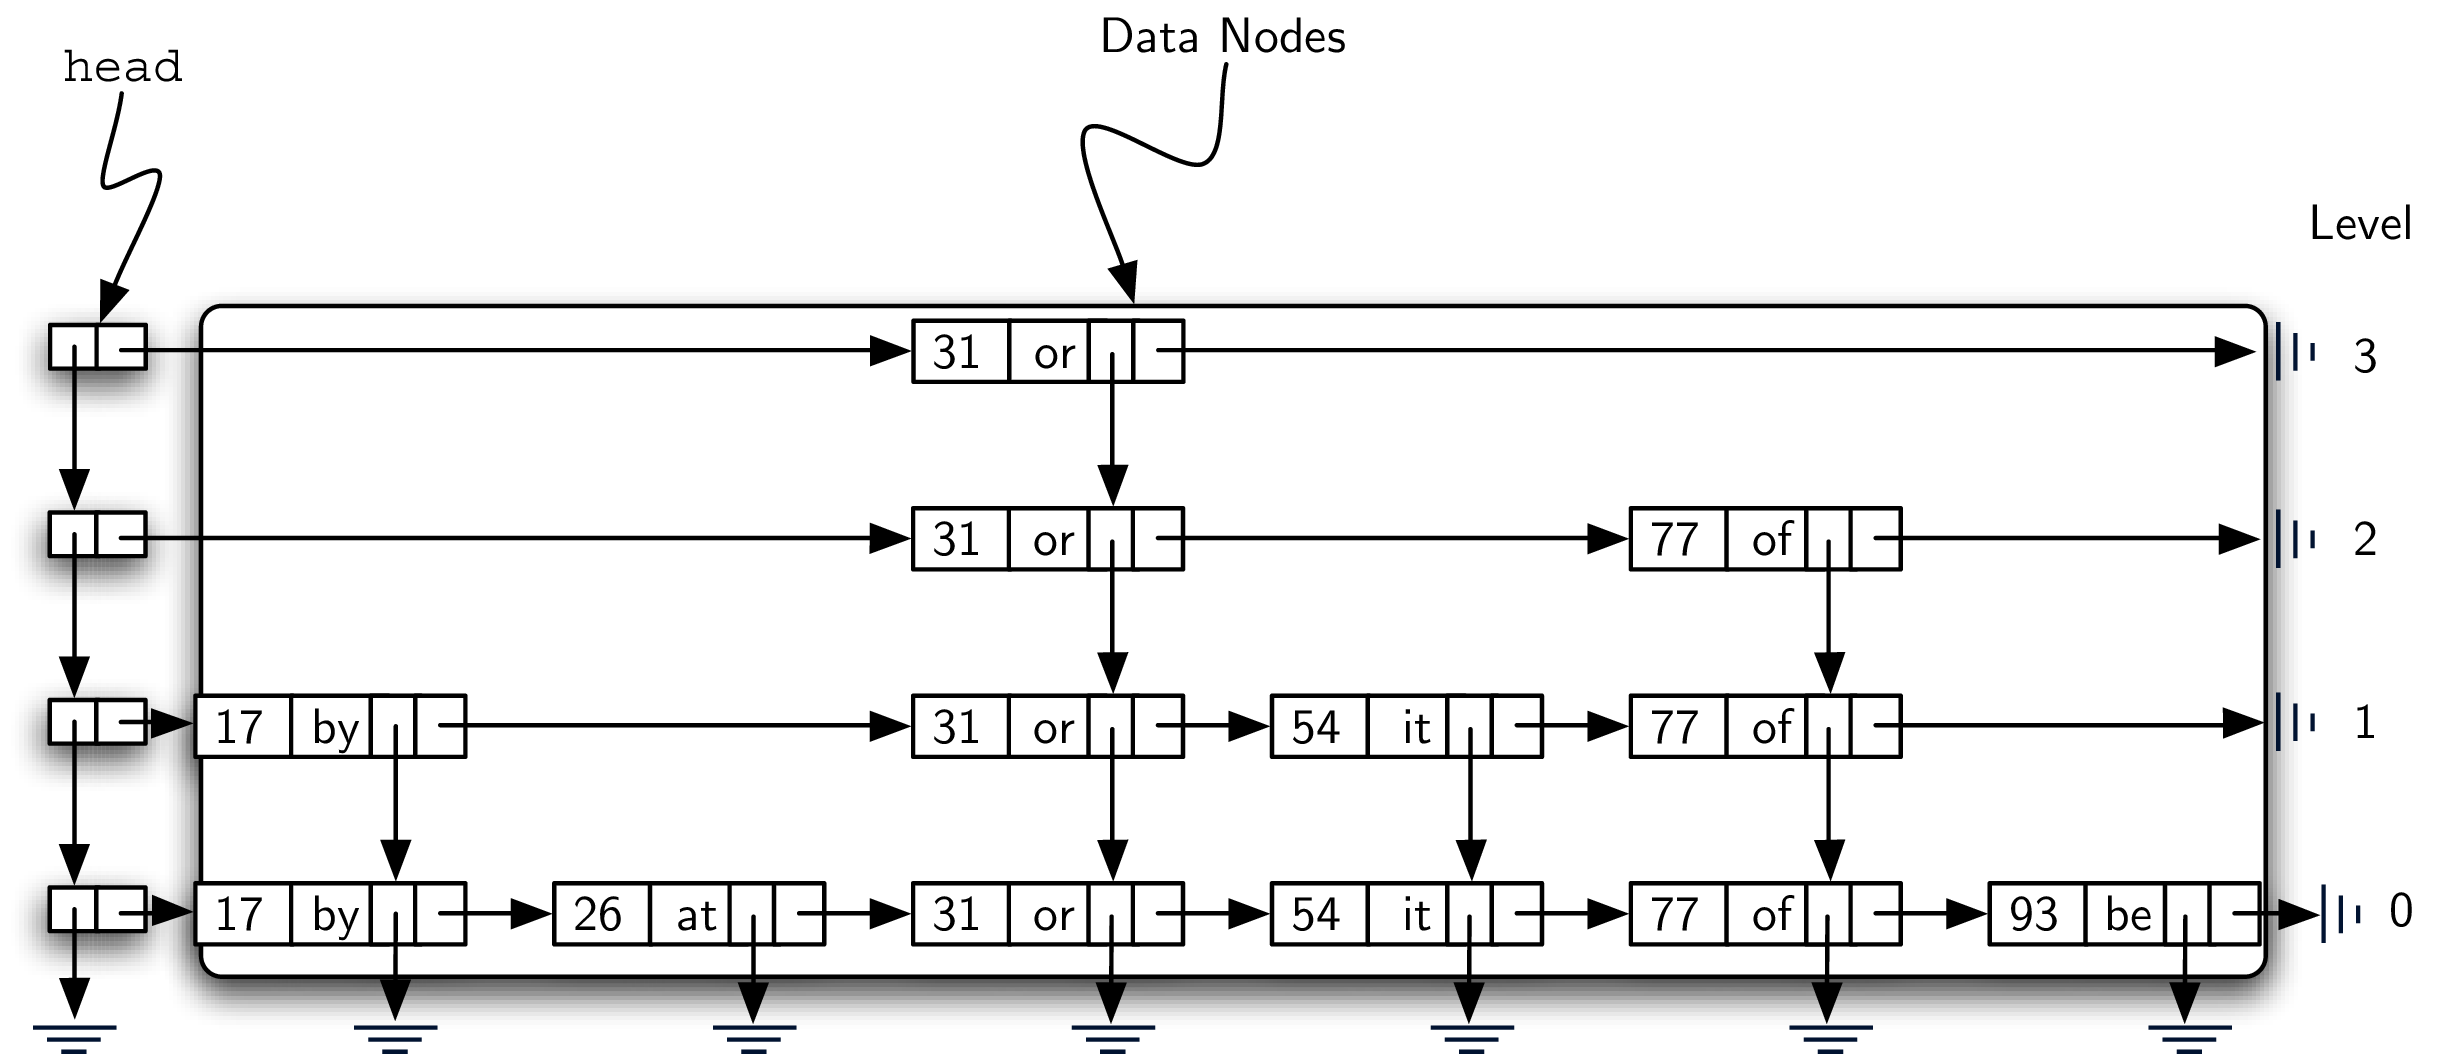 The Body of the Skip List Is Made Up of Data Nodes